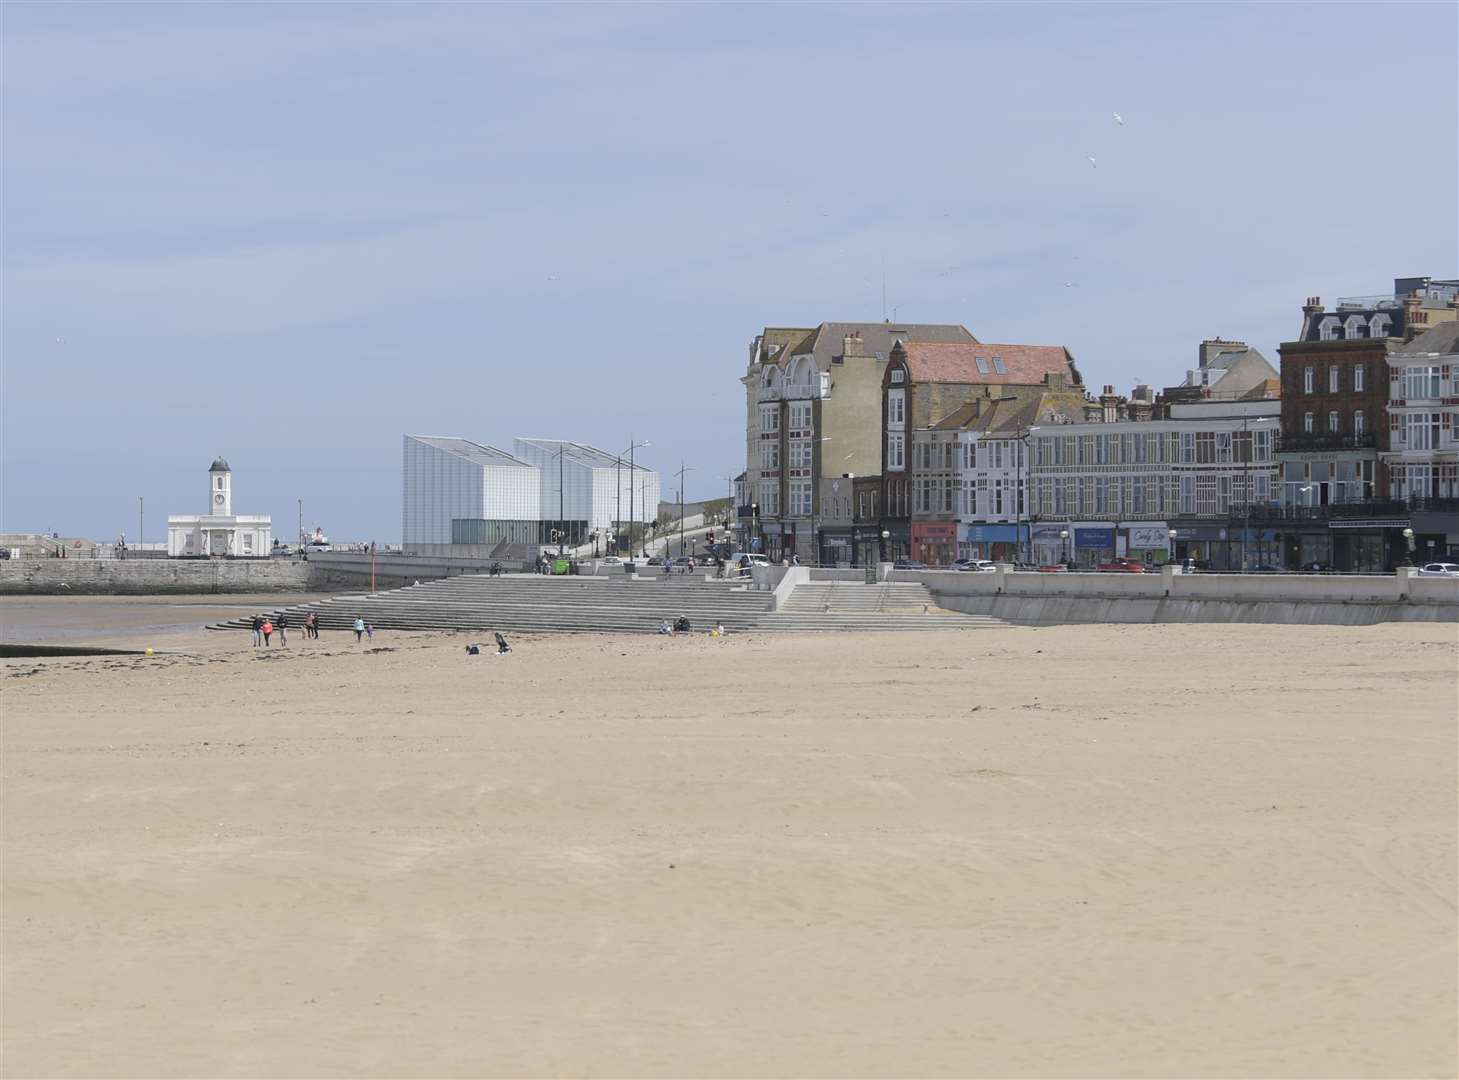 Margate seafront. Picture: Barry Goodwin